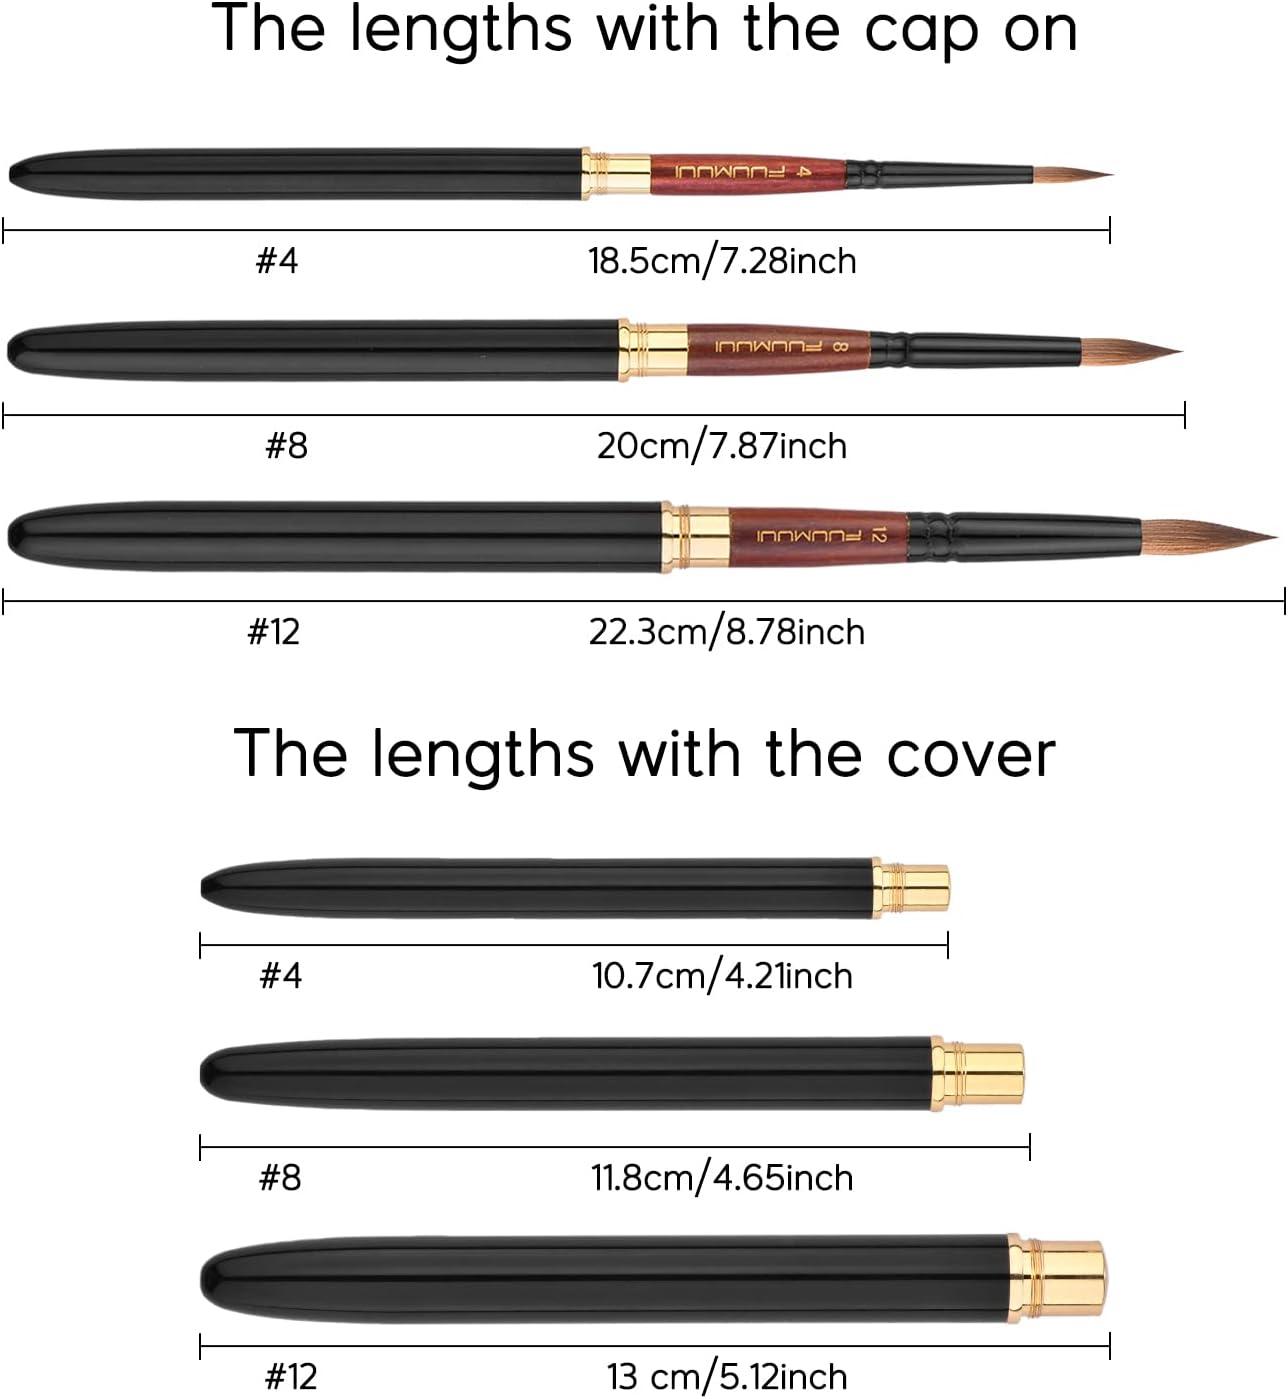 Kolinsky Travel Watercolor Brushes Fuumuui 3pcs Elegant Kolinsky Sable Watercolor  Brushes with Pocket Size Leather Pouch Perfect for Watercolor Gouache Ink  Painting Kolinsky sable brushes